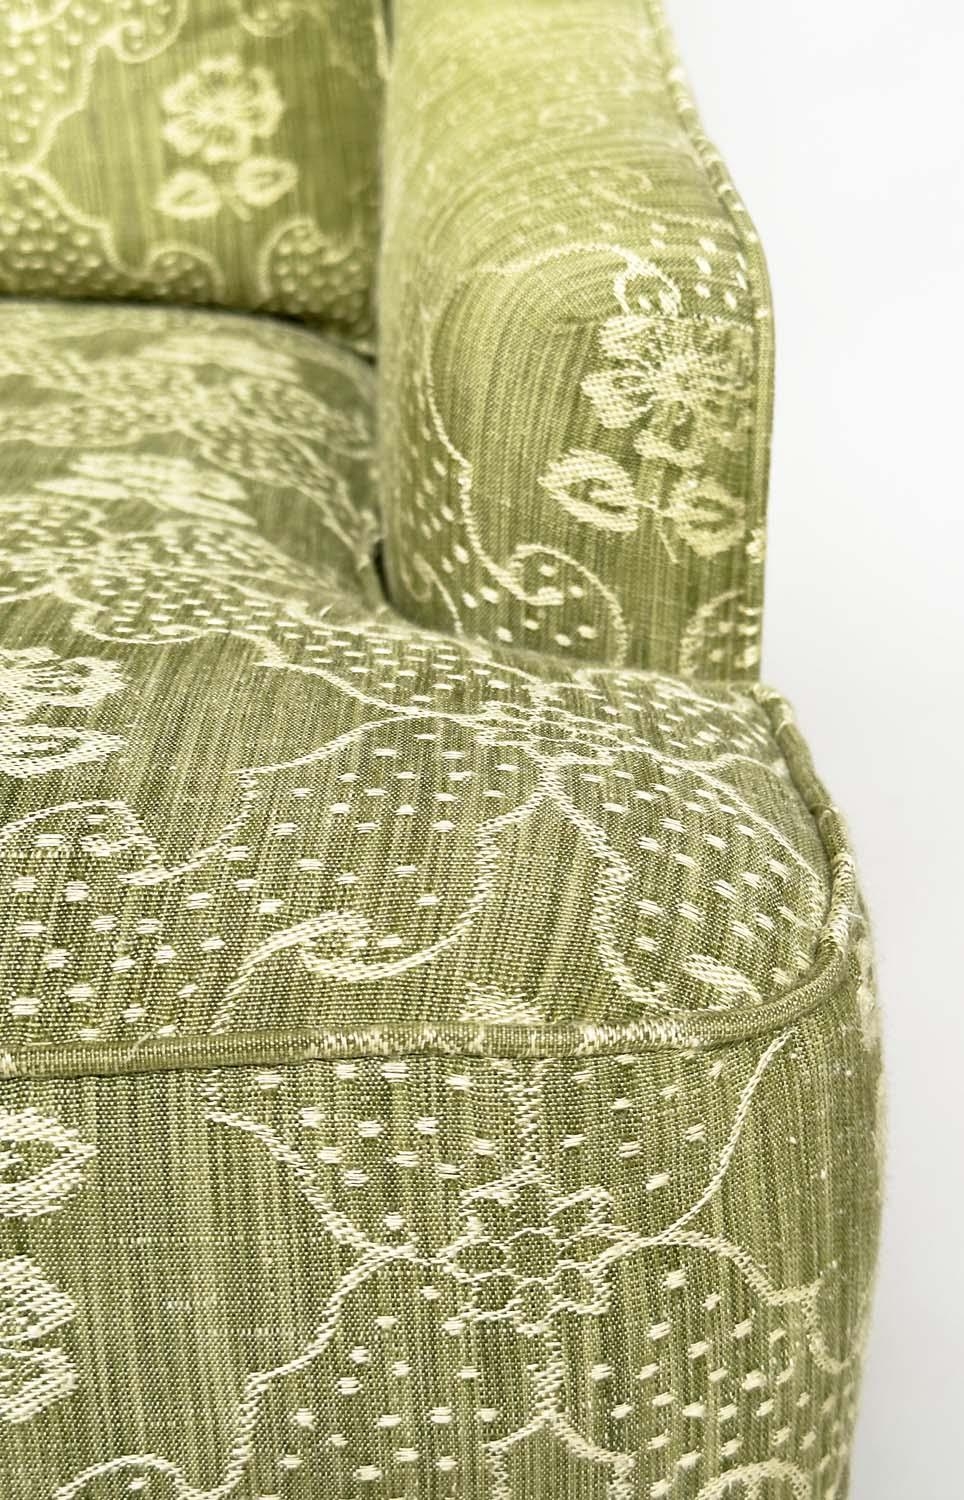 ARMCHAIR, Egerton style with sloping arms and moss green woven upholstery, 66cm W. - Image 3 of 7